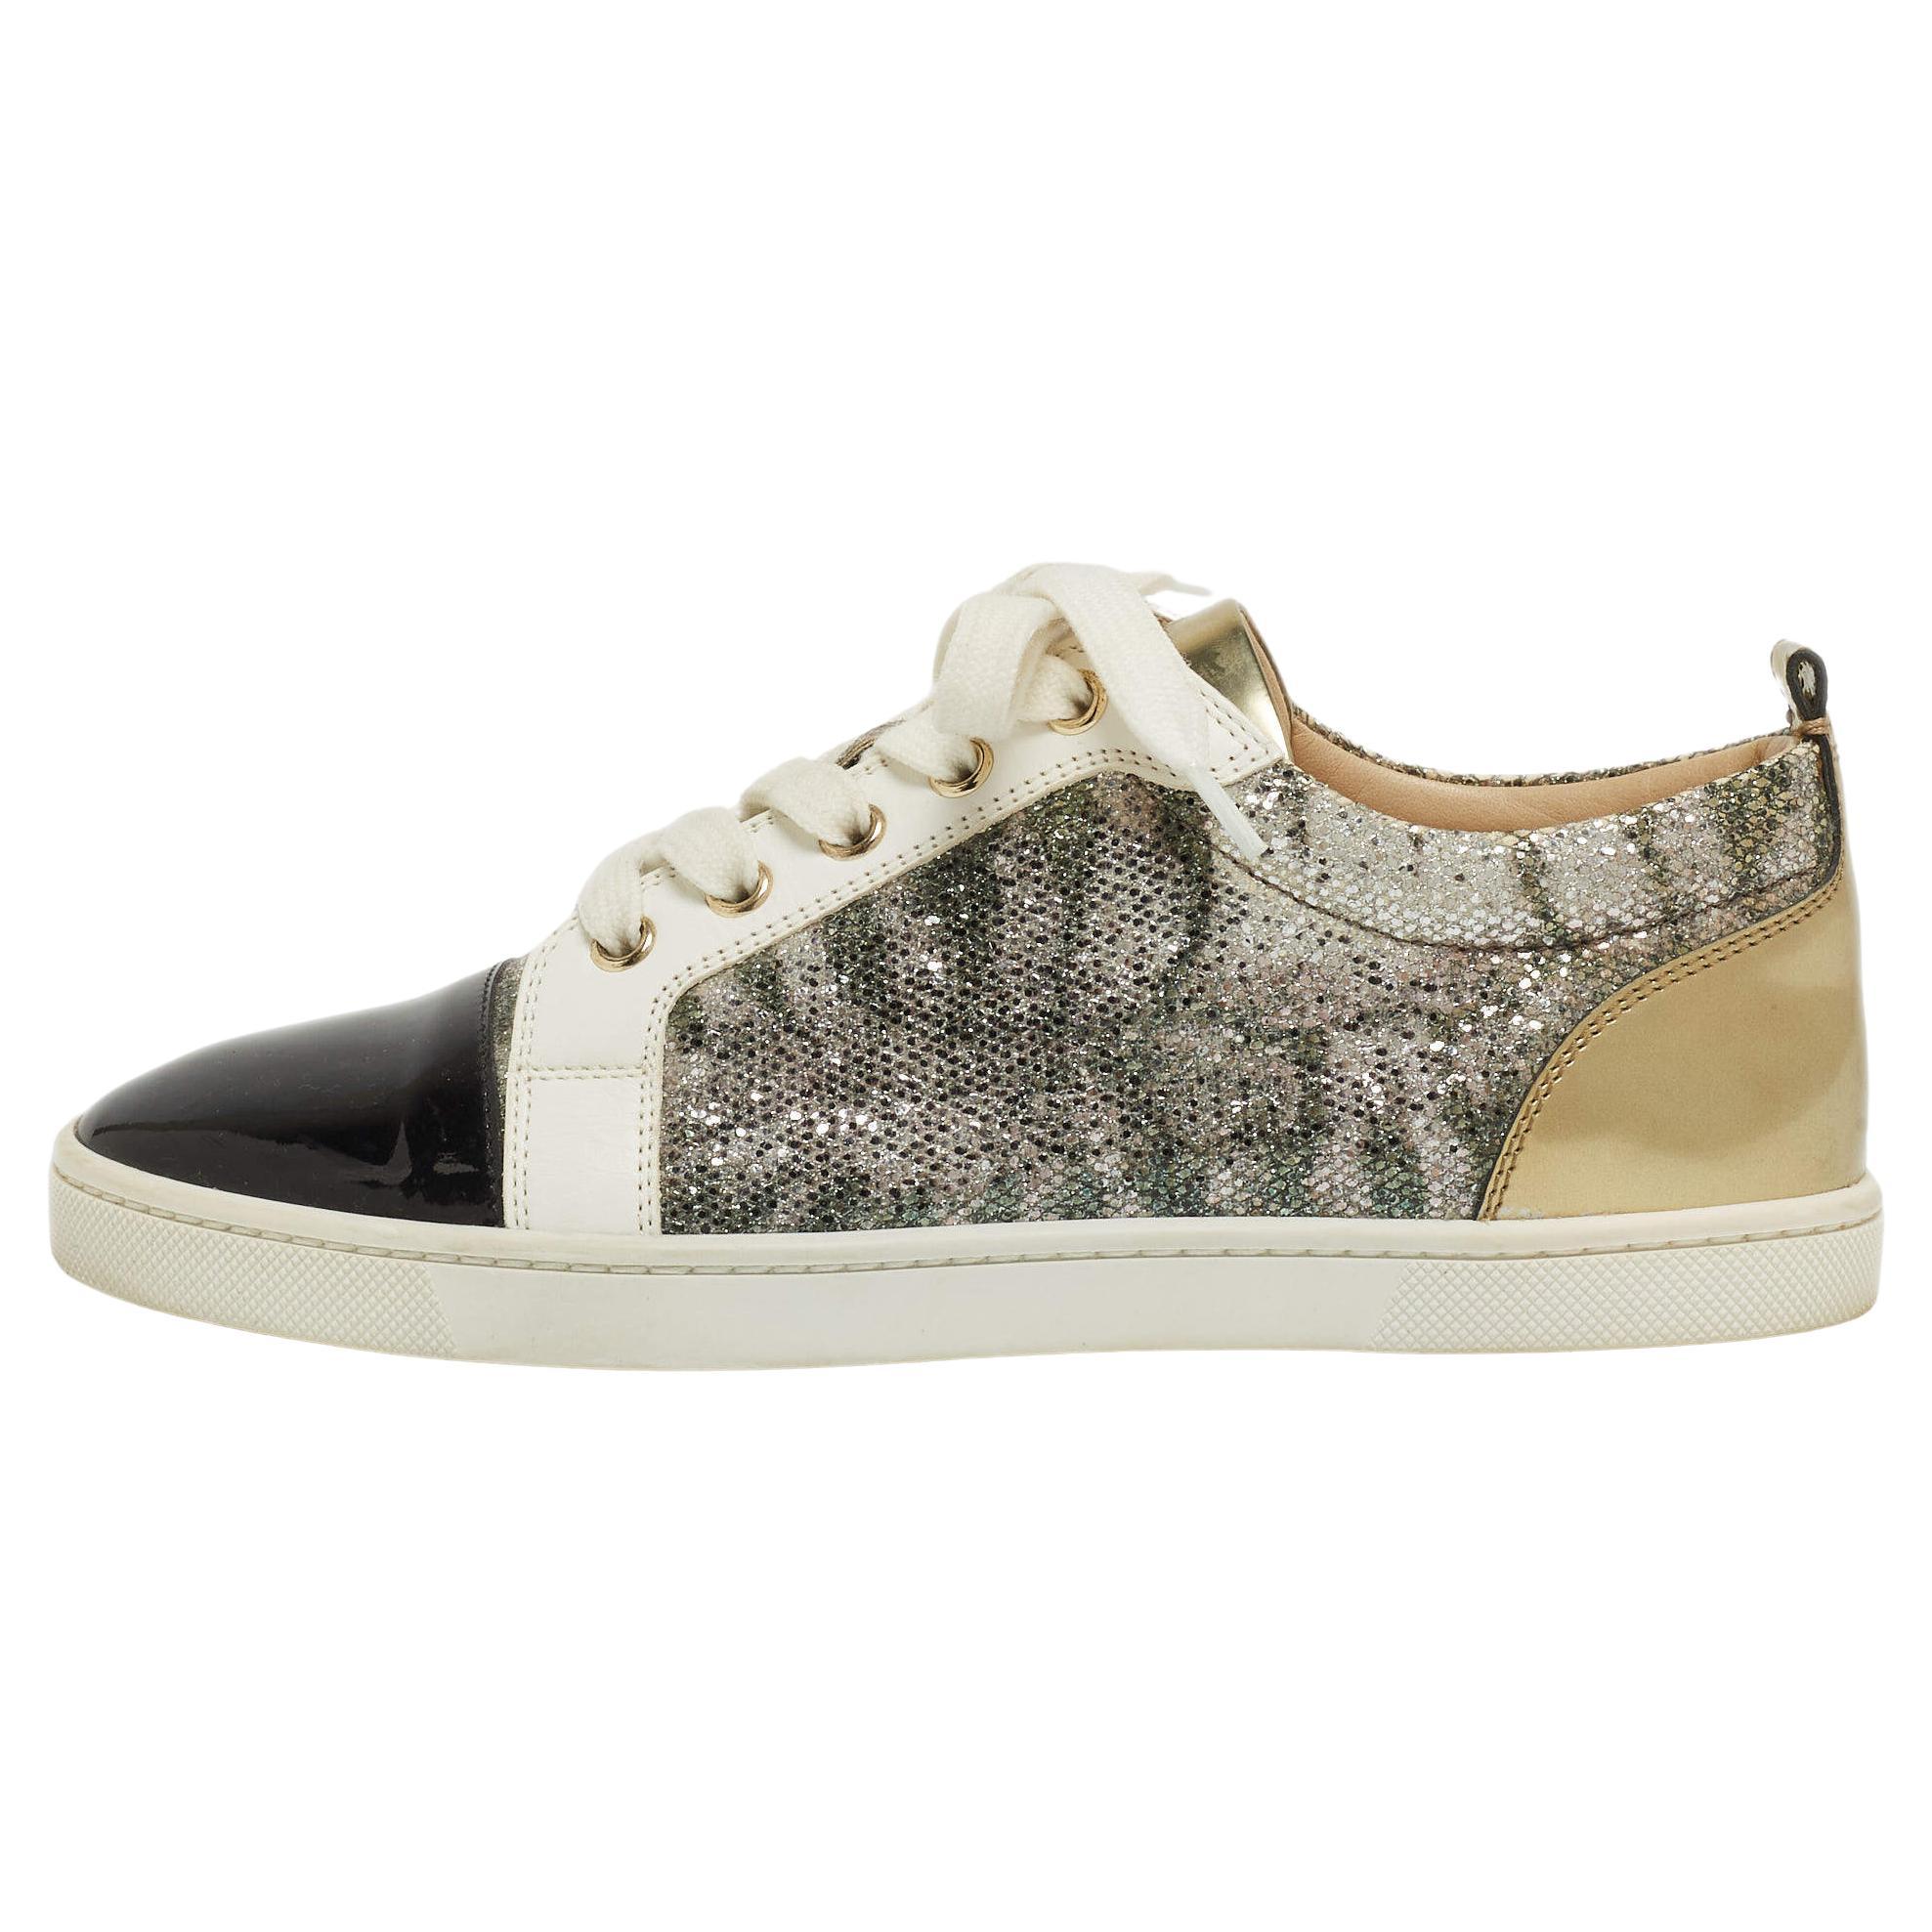 Christian Louboutin Multicolor Coarse Glitter and Leather Gondoliere Sneakers Si For Sale